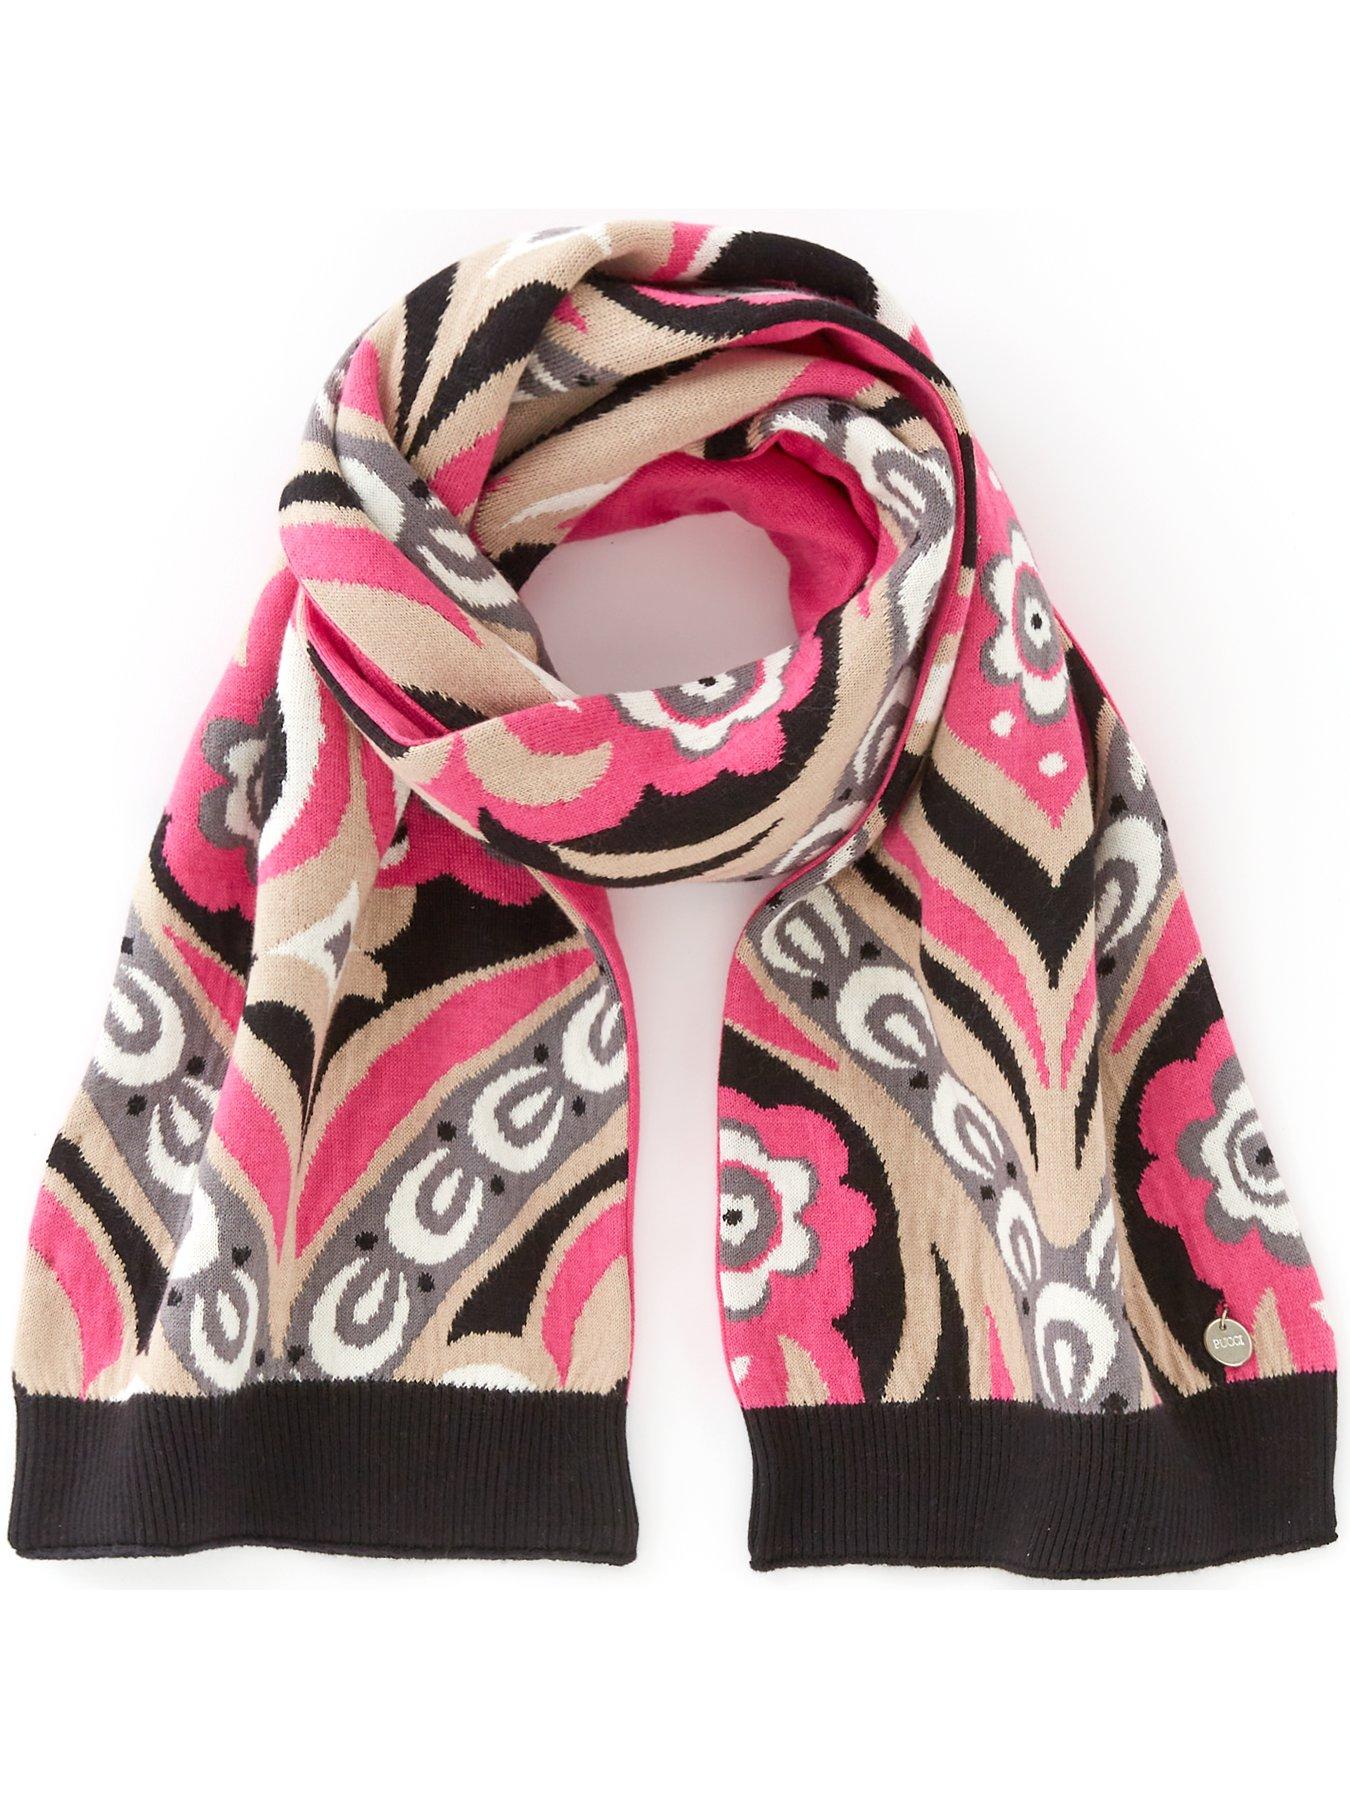 Accessories Printed Scarf - Pink